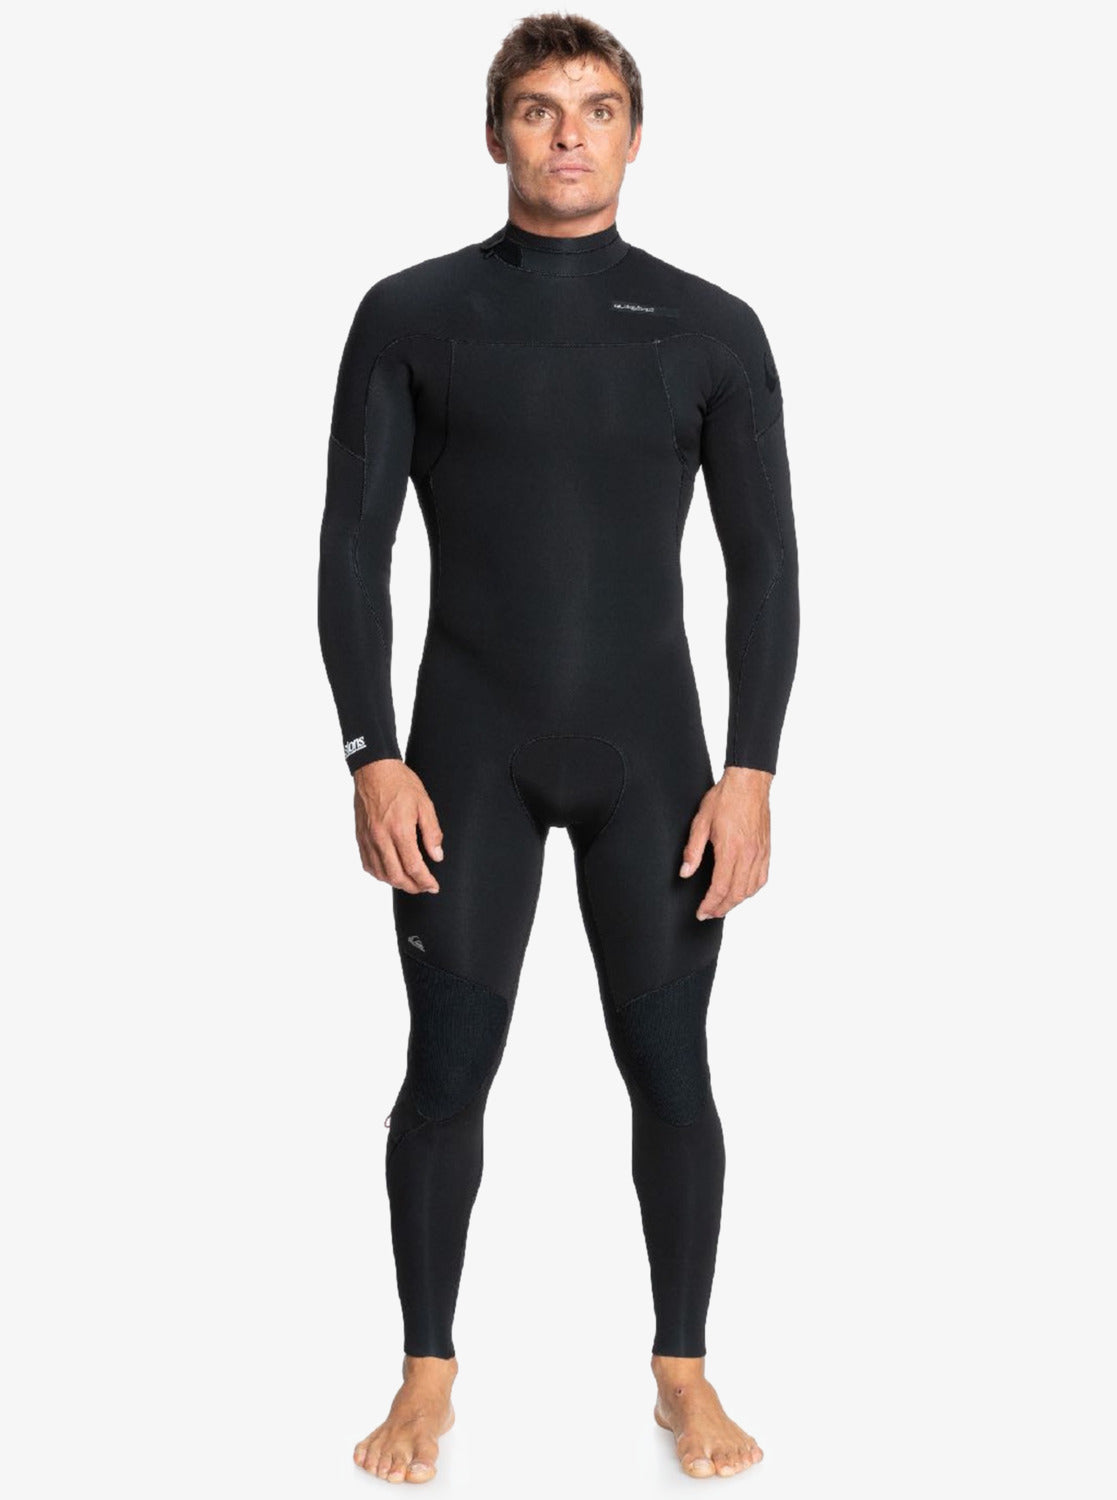 QUIKSILVER MENS EVERYDAY SESSIONS 3/2MM BACK ZIP WETSUIT